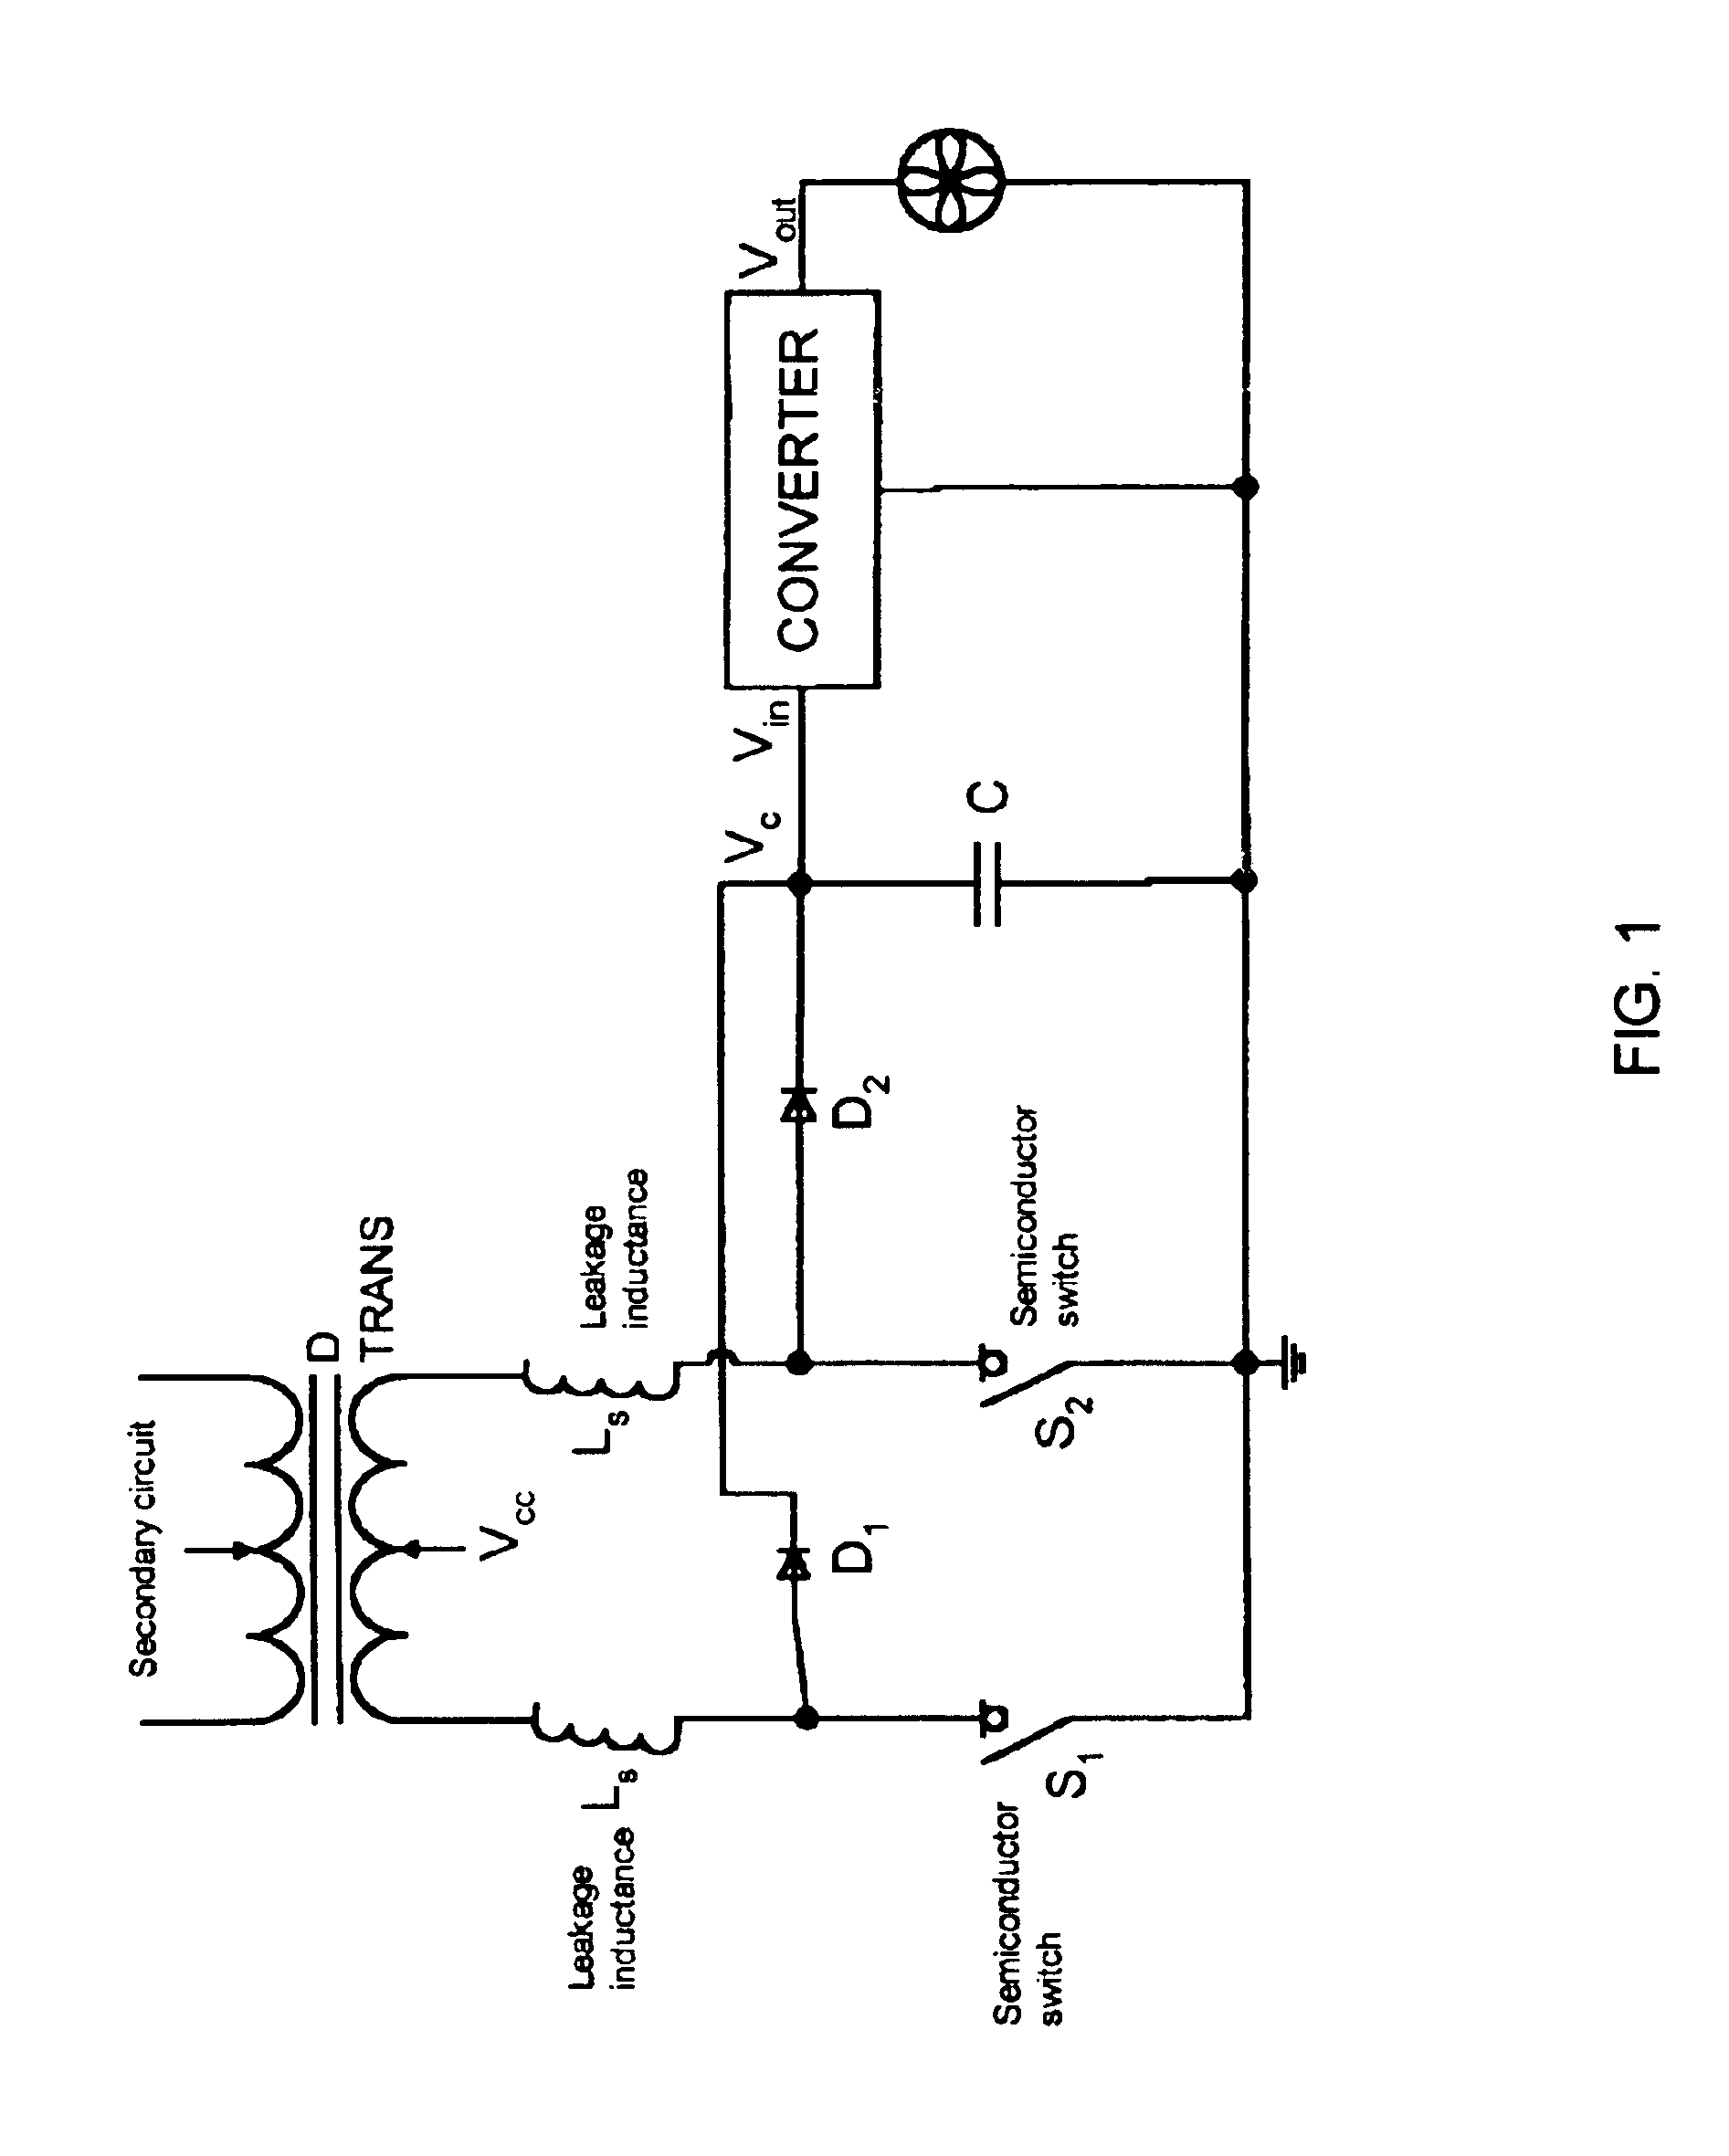 Self-regulated cooling system for switching power supplies using parasitic effects of switching